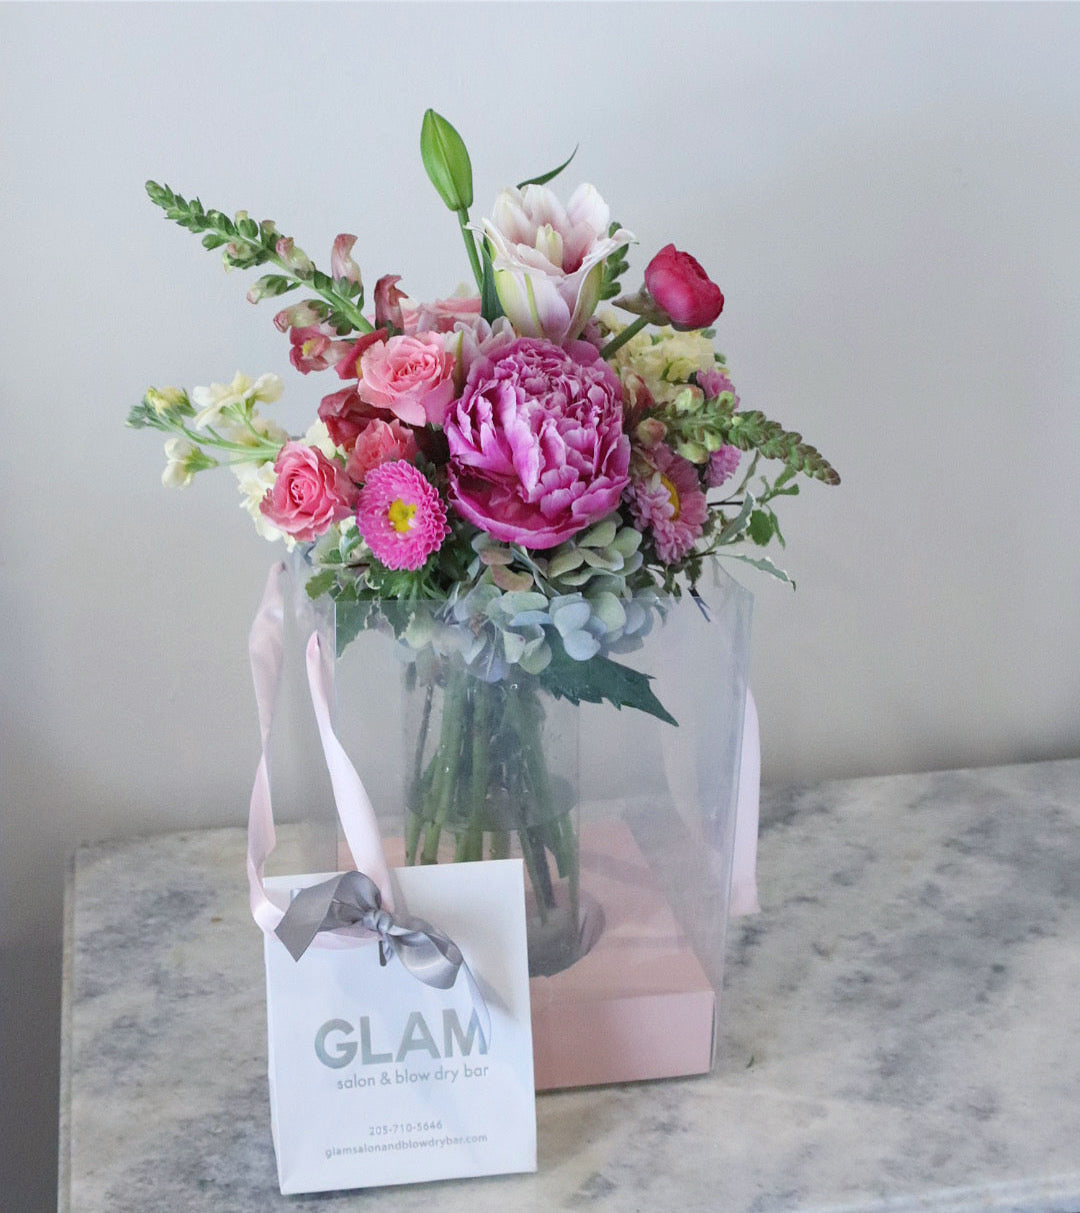 The Glam and Glow Floral Bundle